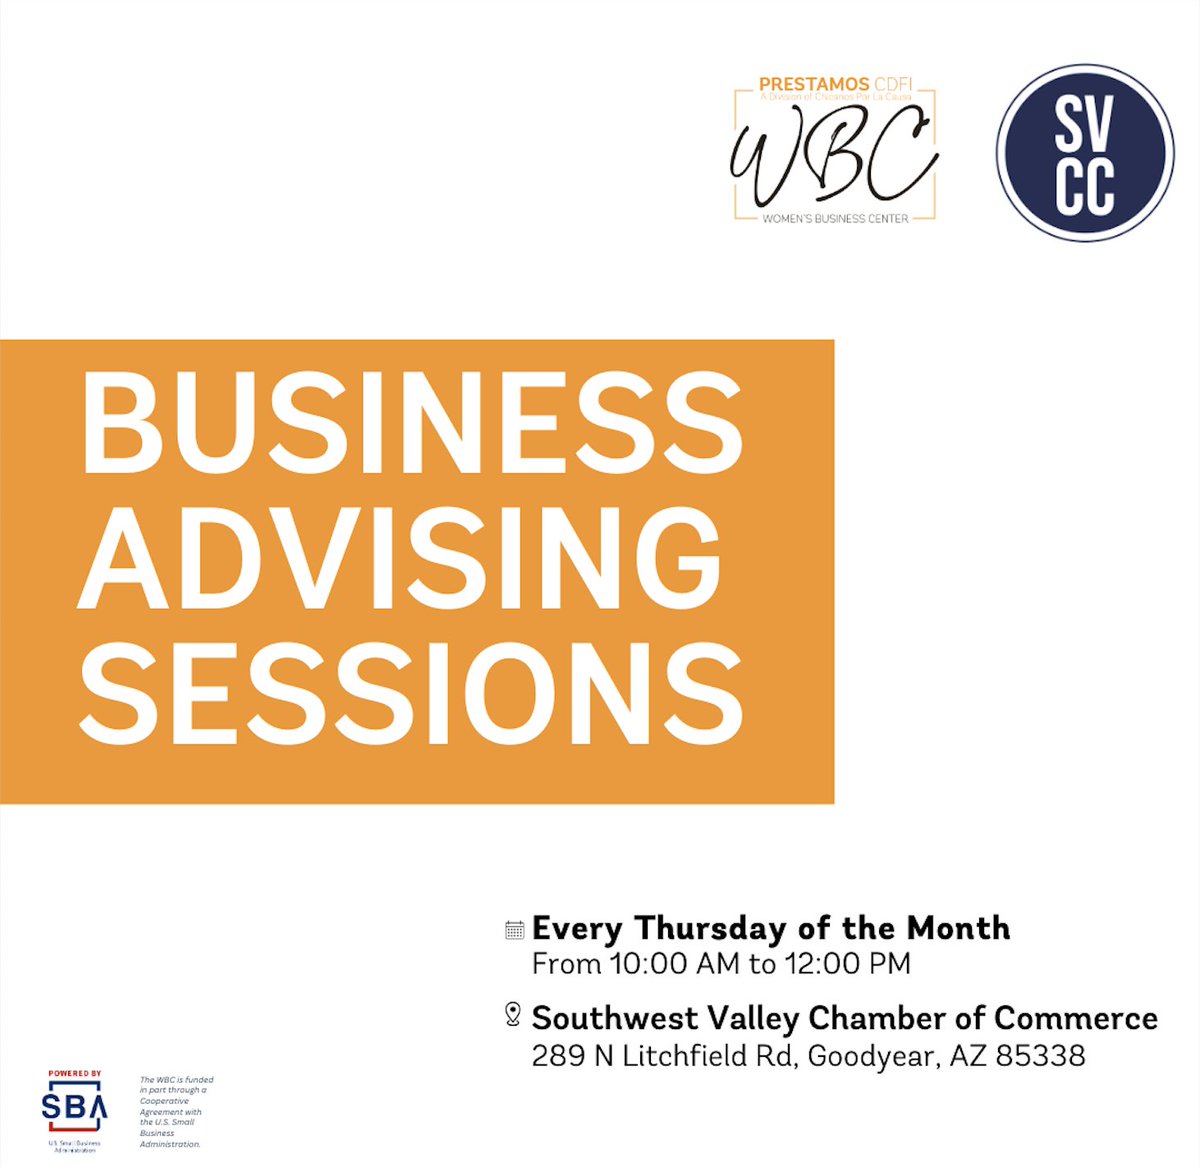 Prestamos CDFI Women's Business Center will be holding Business Advising Sessions the first Thursday of every month from 10:00am to 12:00pm. Join us after Empowering Women in Business this Thursday for their first Business Advising Sessions! #CPLC #SVCC #Businessadvising